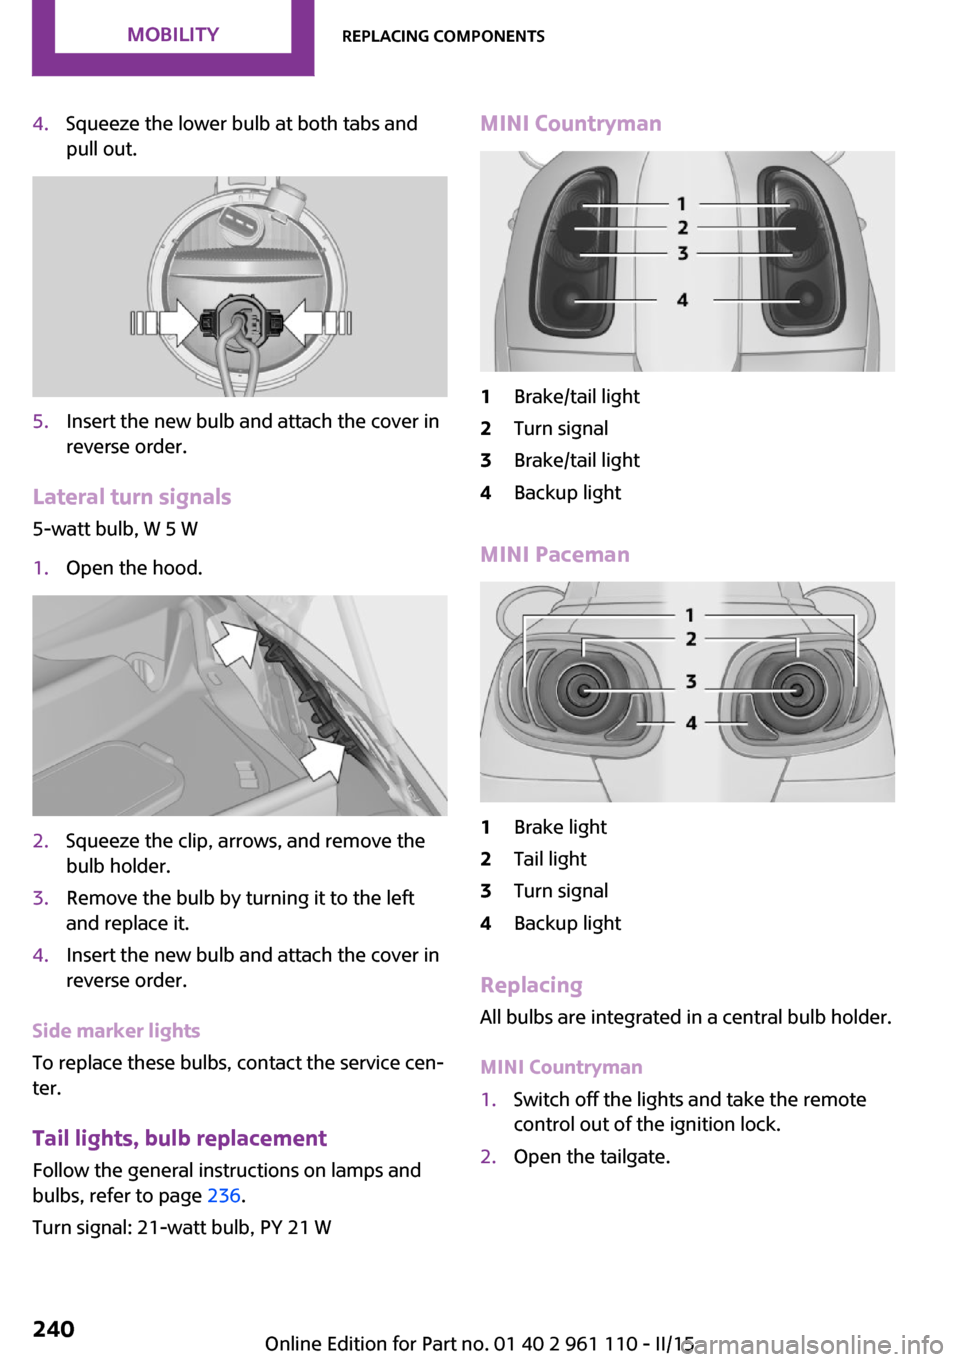 MINI Countryman 2015   (Mini Connected) User Guide 4.Squeeze the lower bulb at both tabs and
pull out.5.Insert the new bulb and attach the cover in
reverse order.
Lateral turn signals
5-watt bulb, W 5 W
1.Open the hood.2.Squeeze the clip, arrows, and 